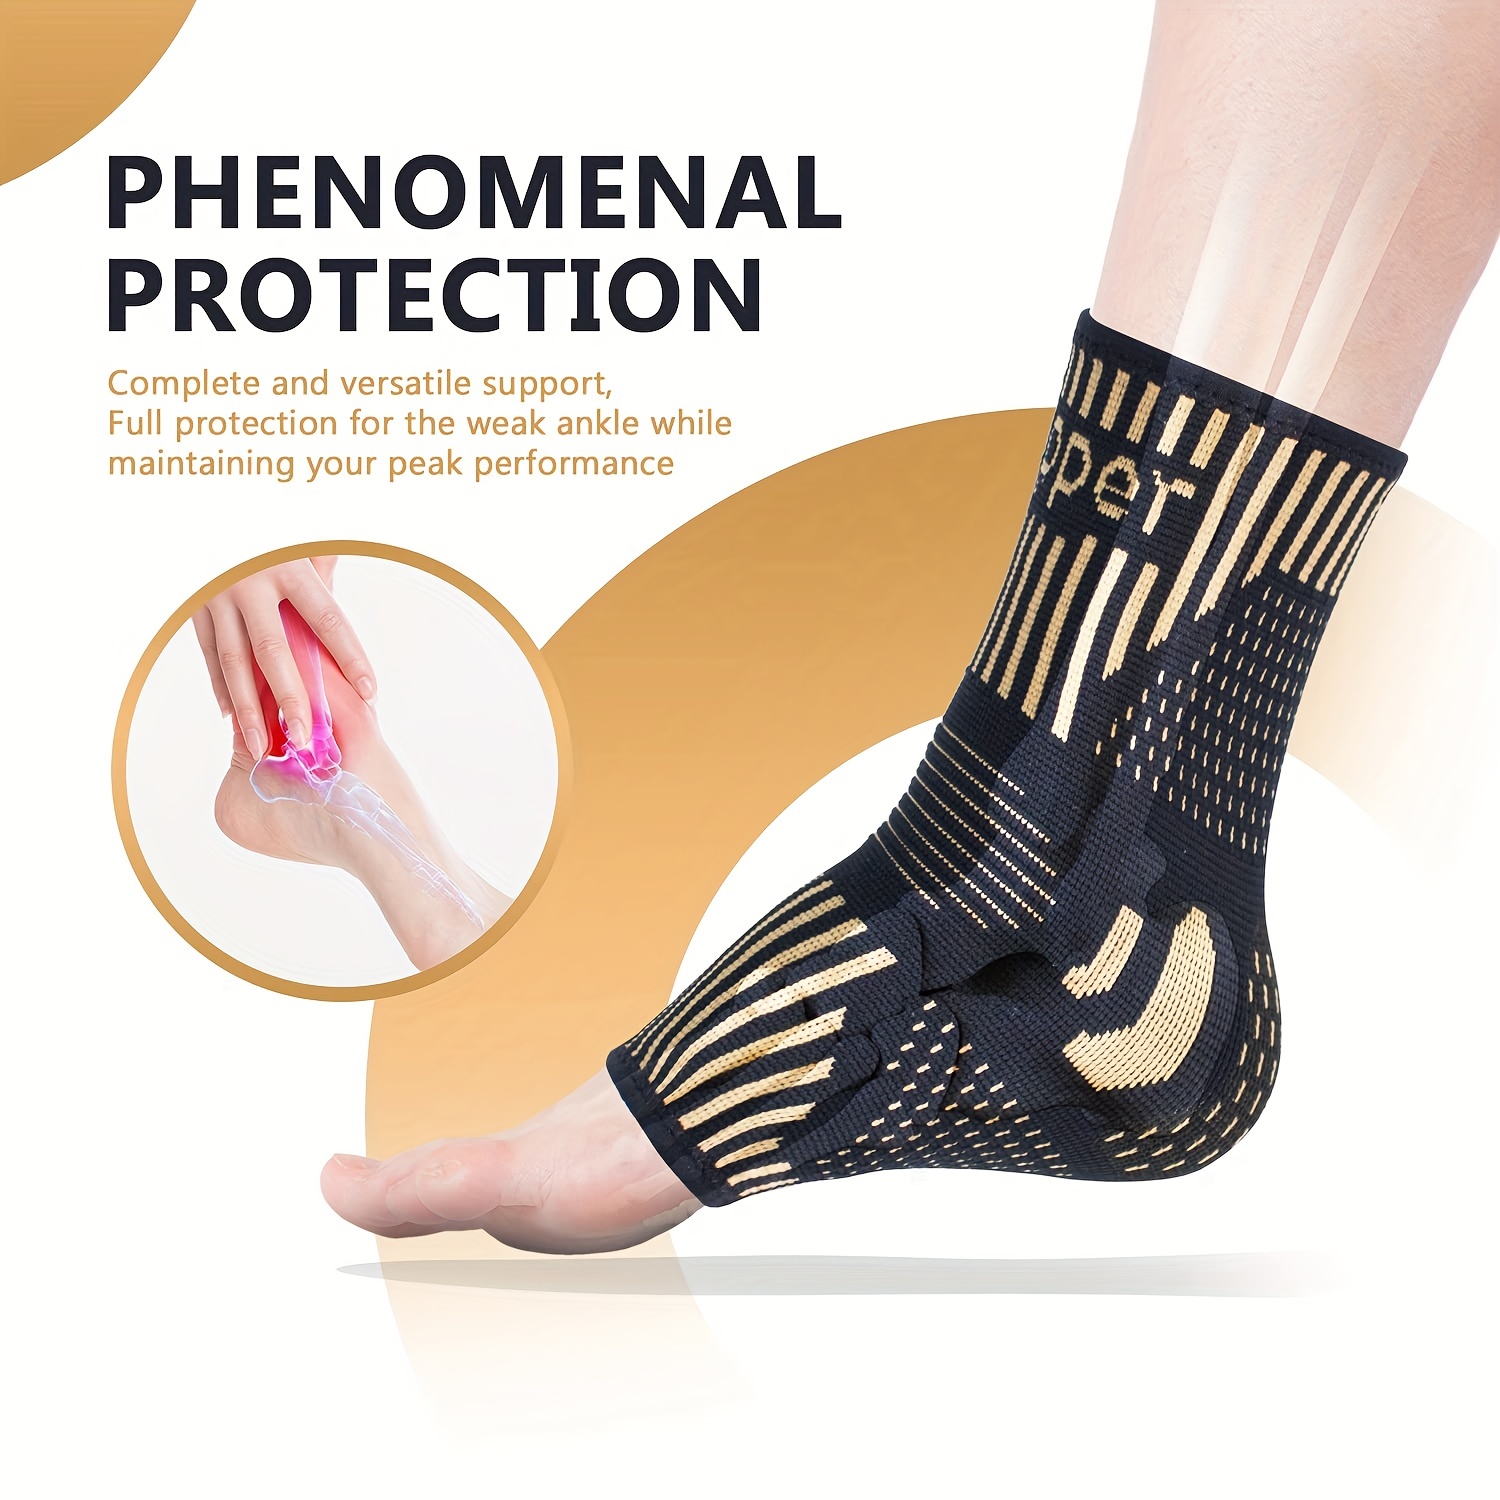 COPPER Compression Recovery Foot Sleeve for Men & Women,Copper Infused  Plantar Fasciitis Socks for Arch